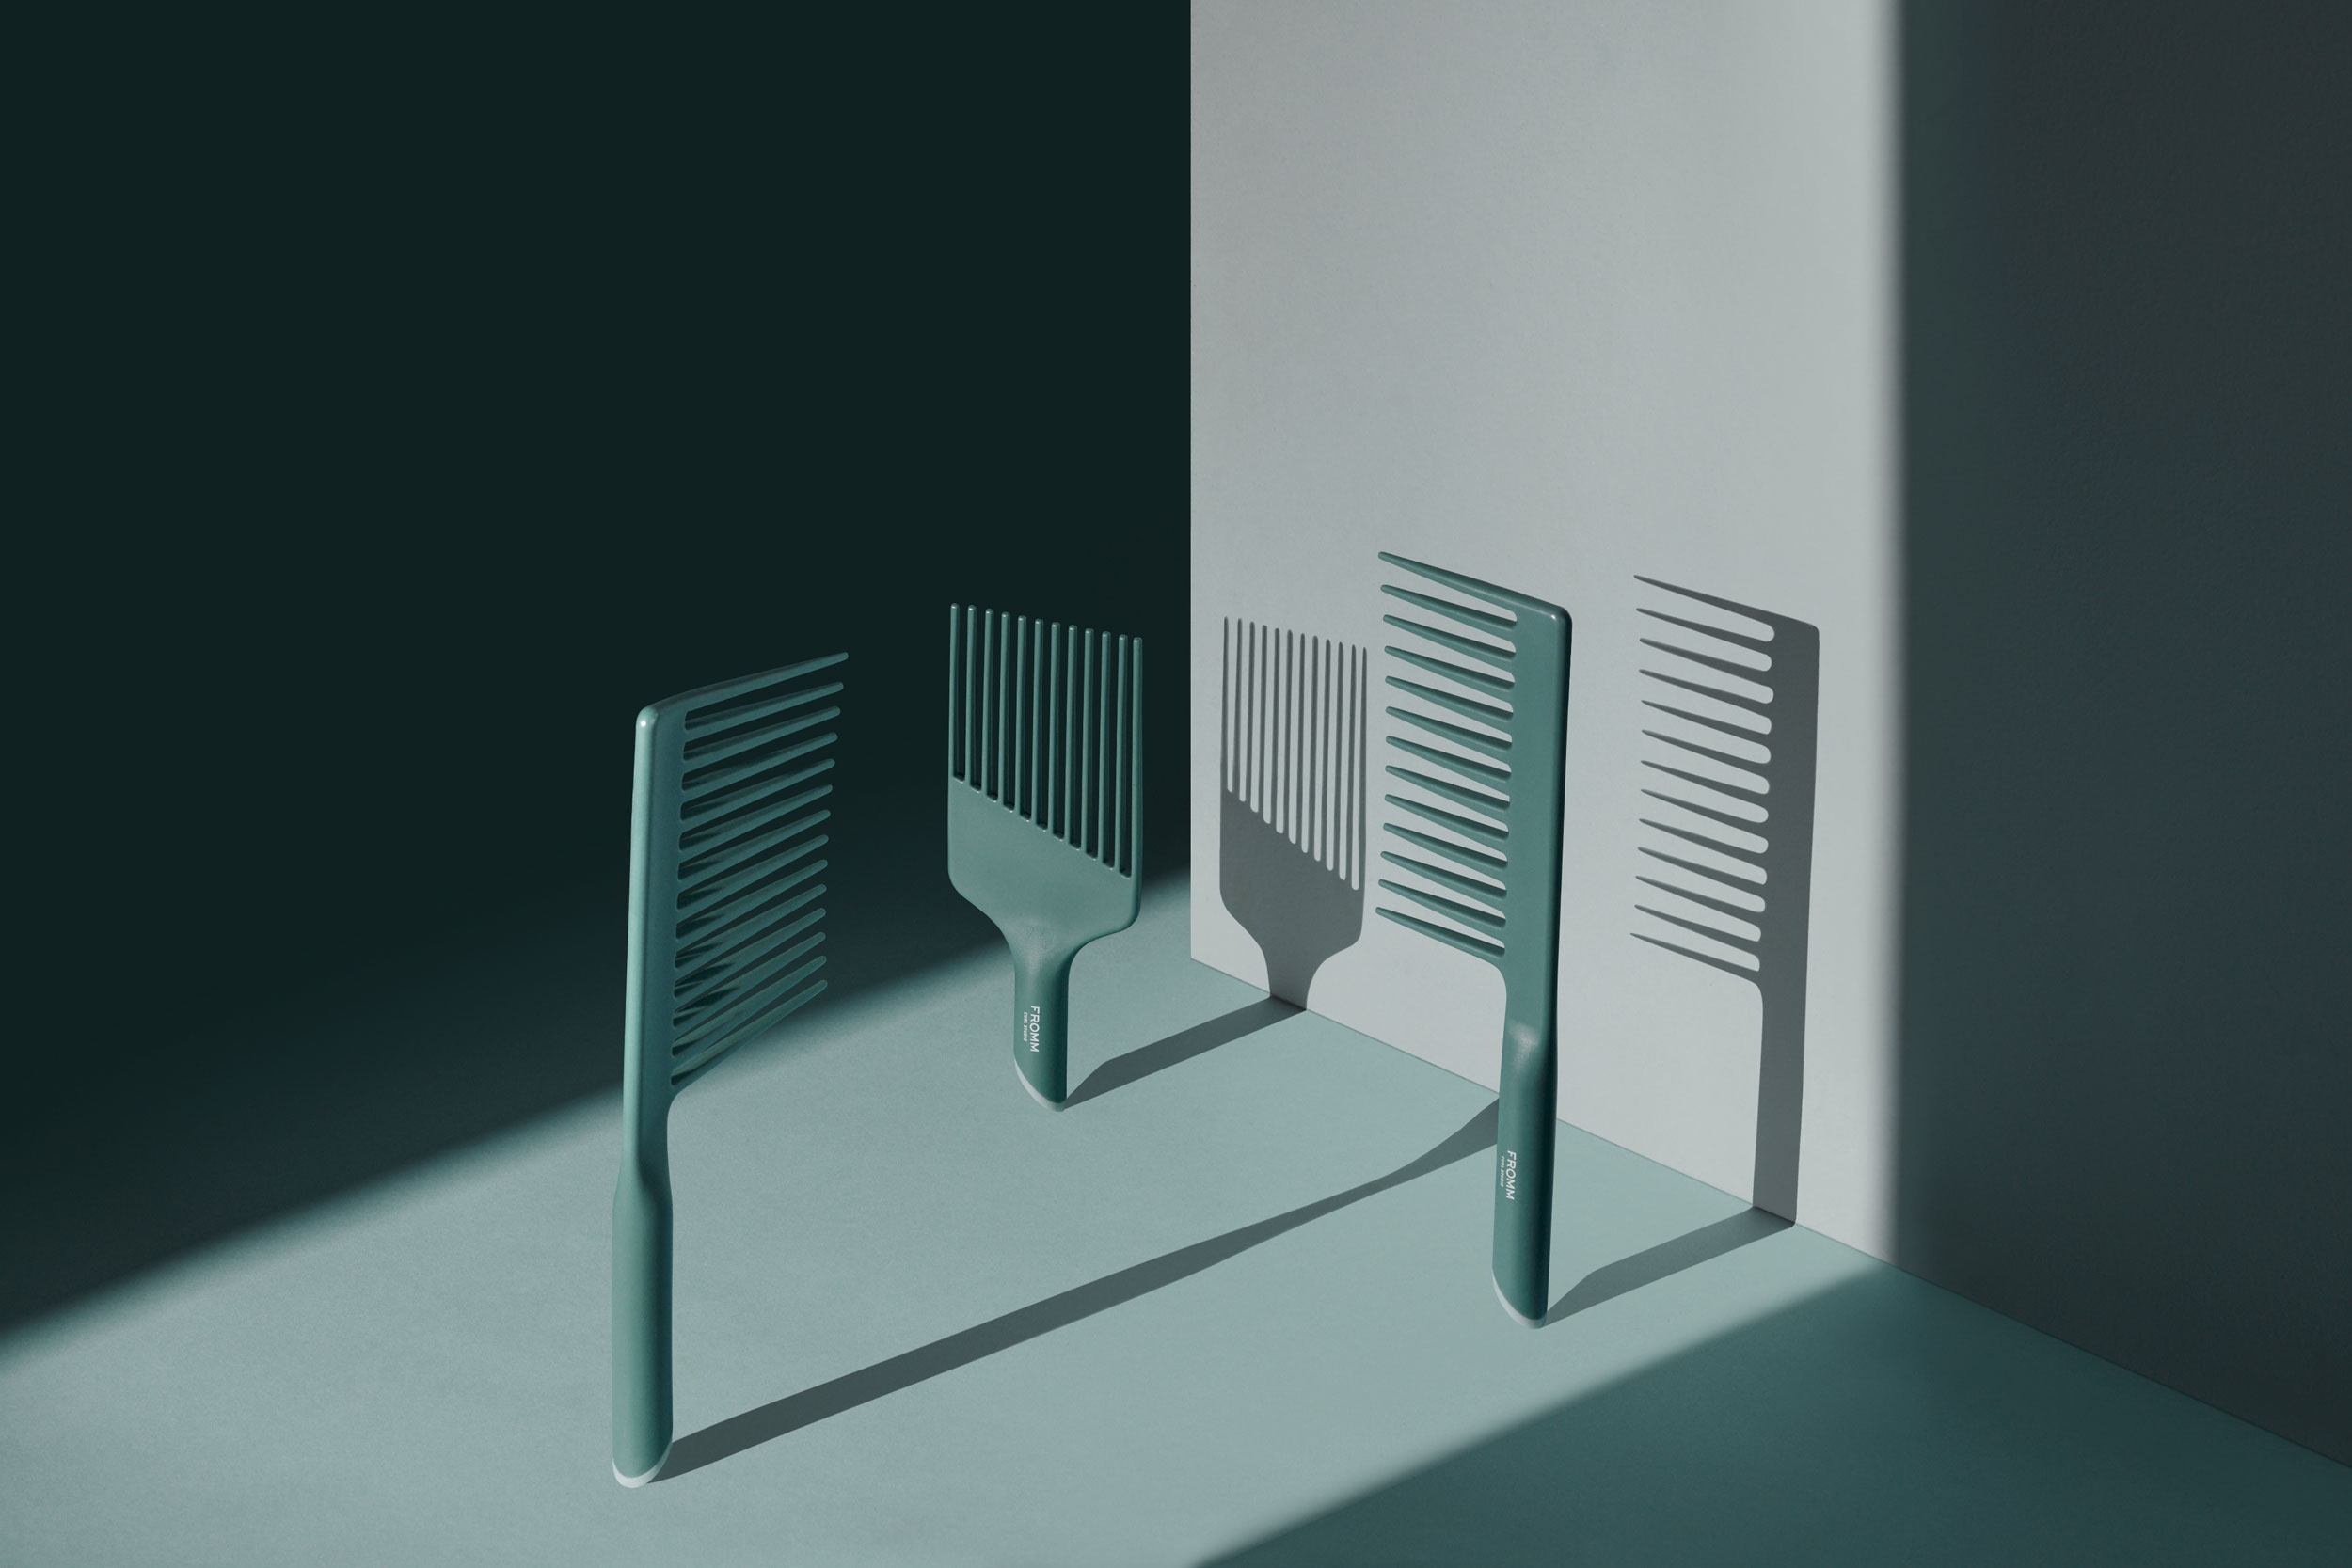 Trio of green combs suspended vertically and lit to cast a long shadow